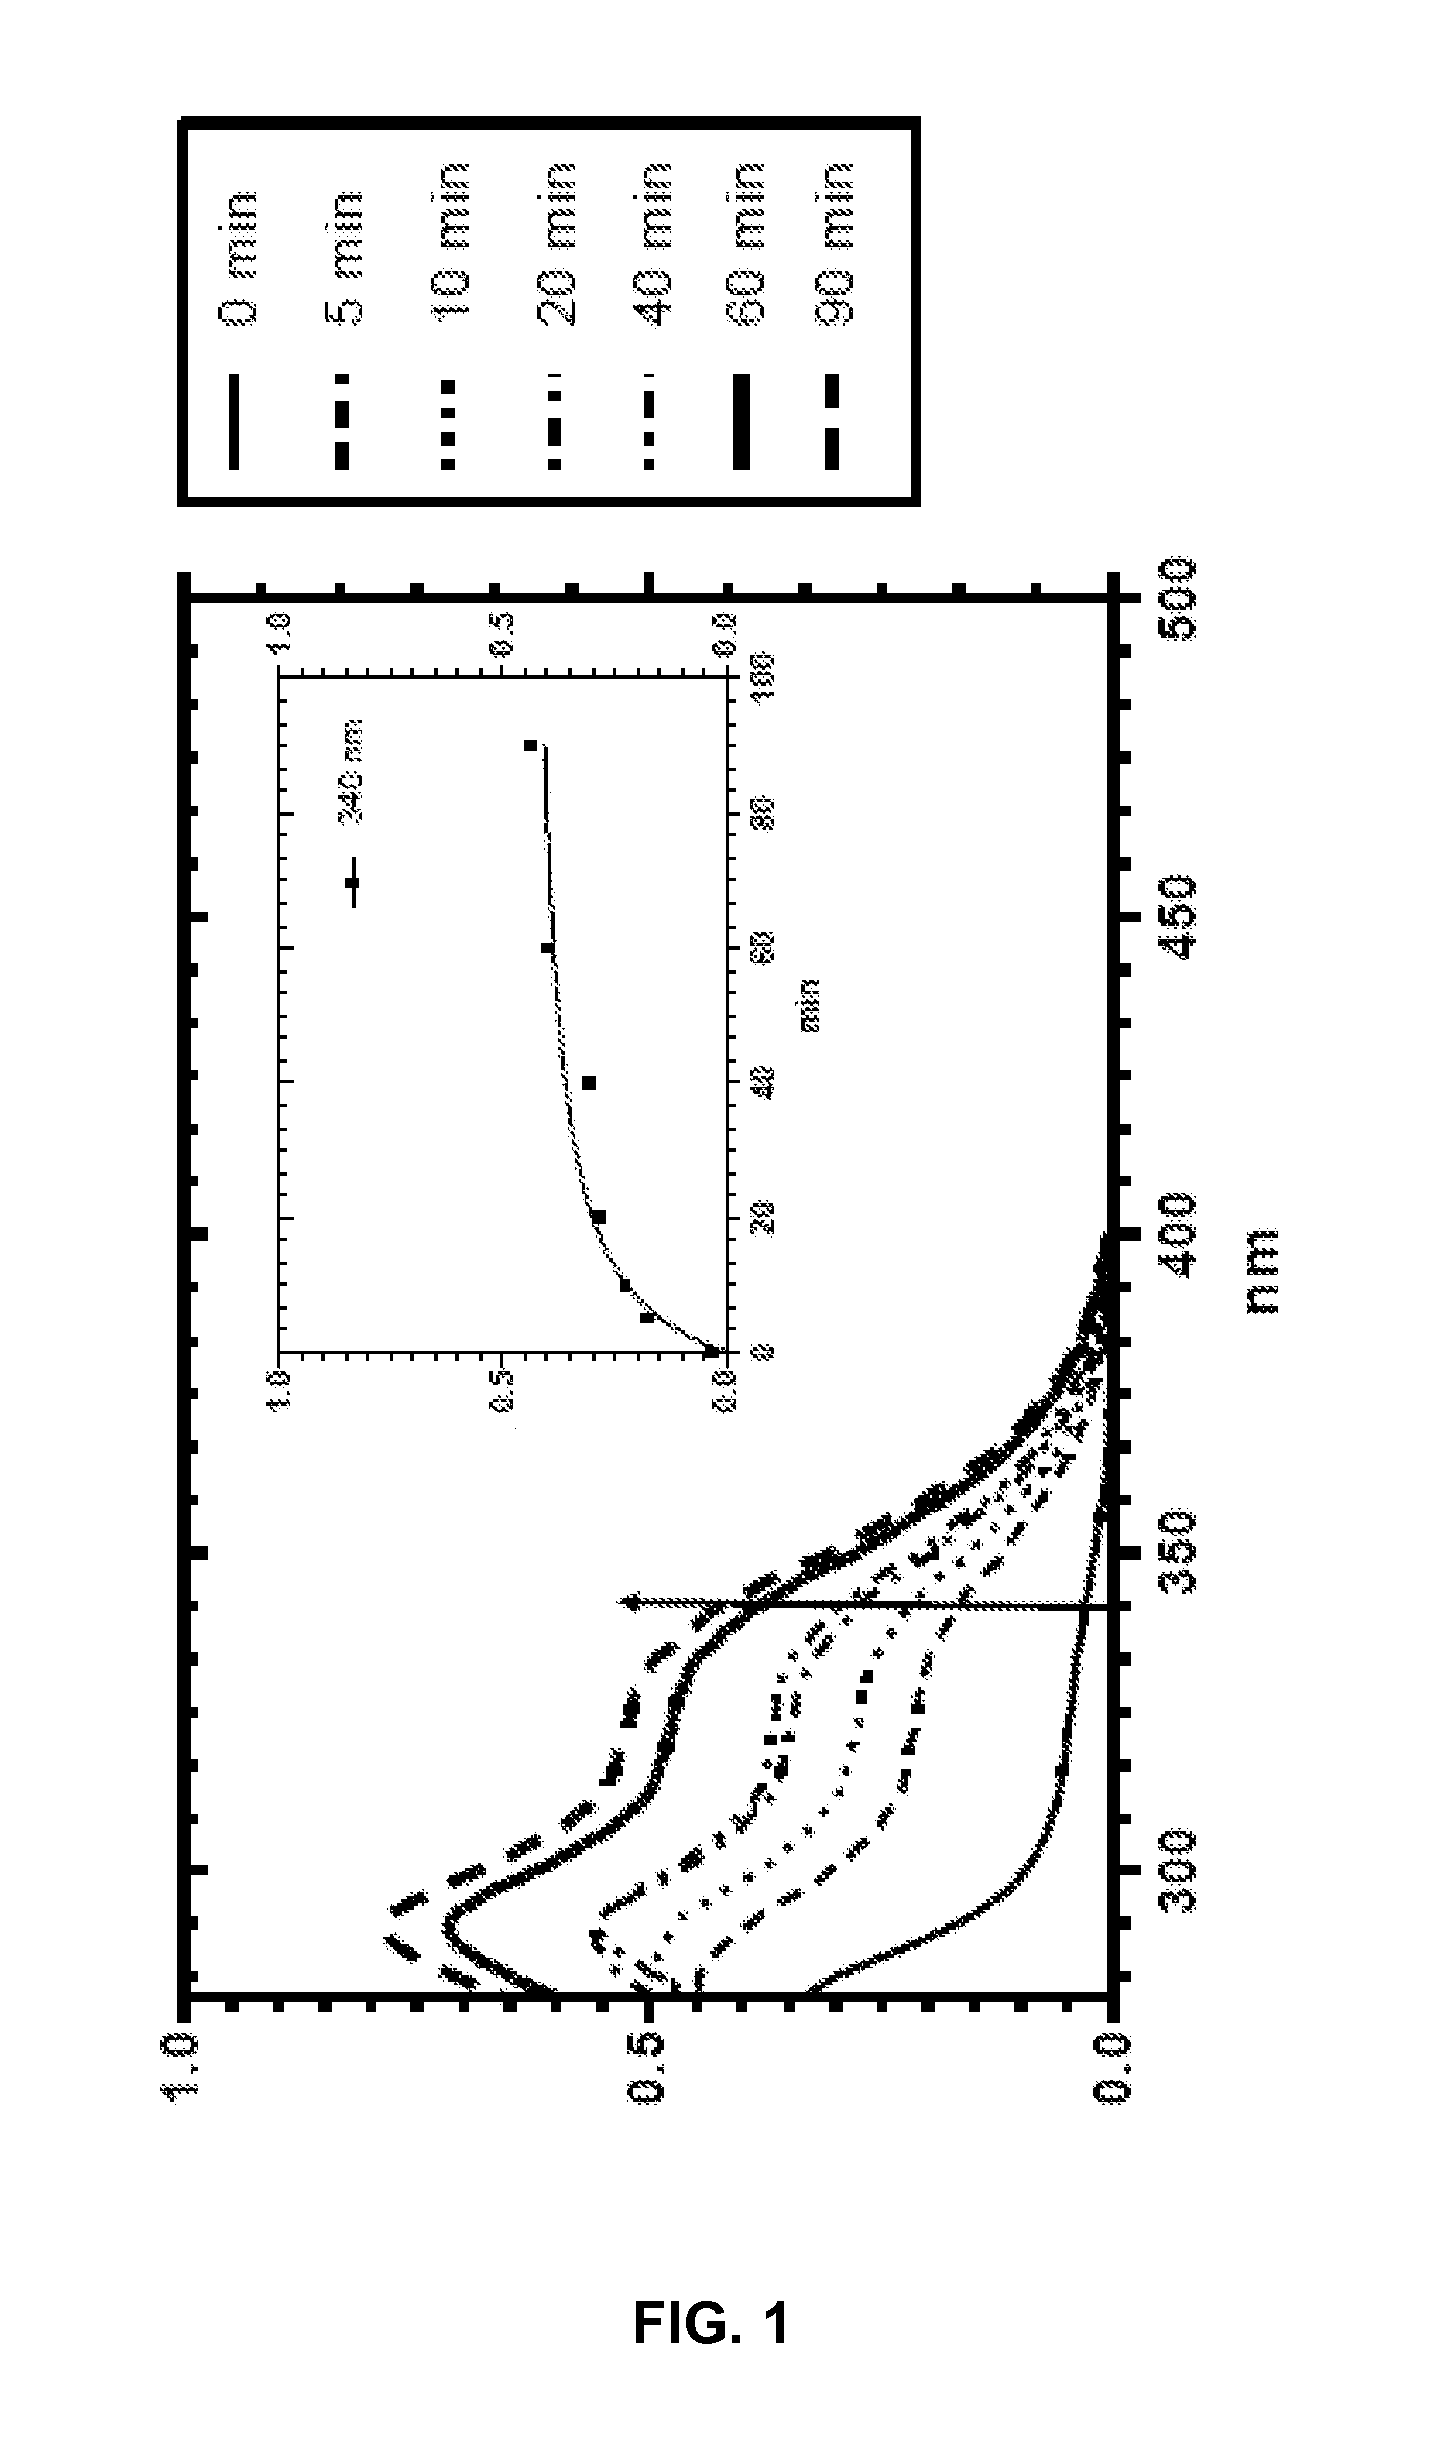 Silyl polymeric benzoic acid ester compouonds, uses, and compositions thereof